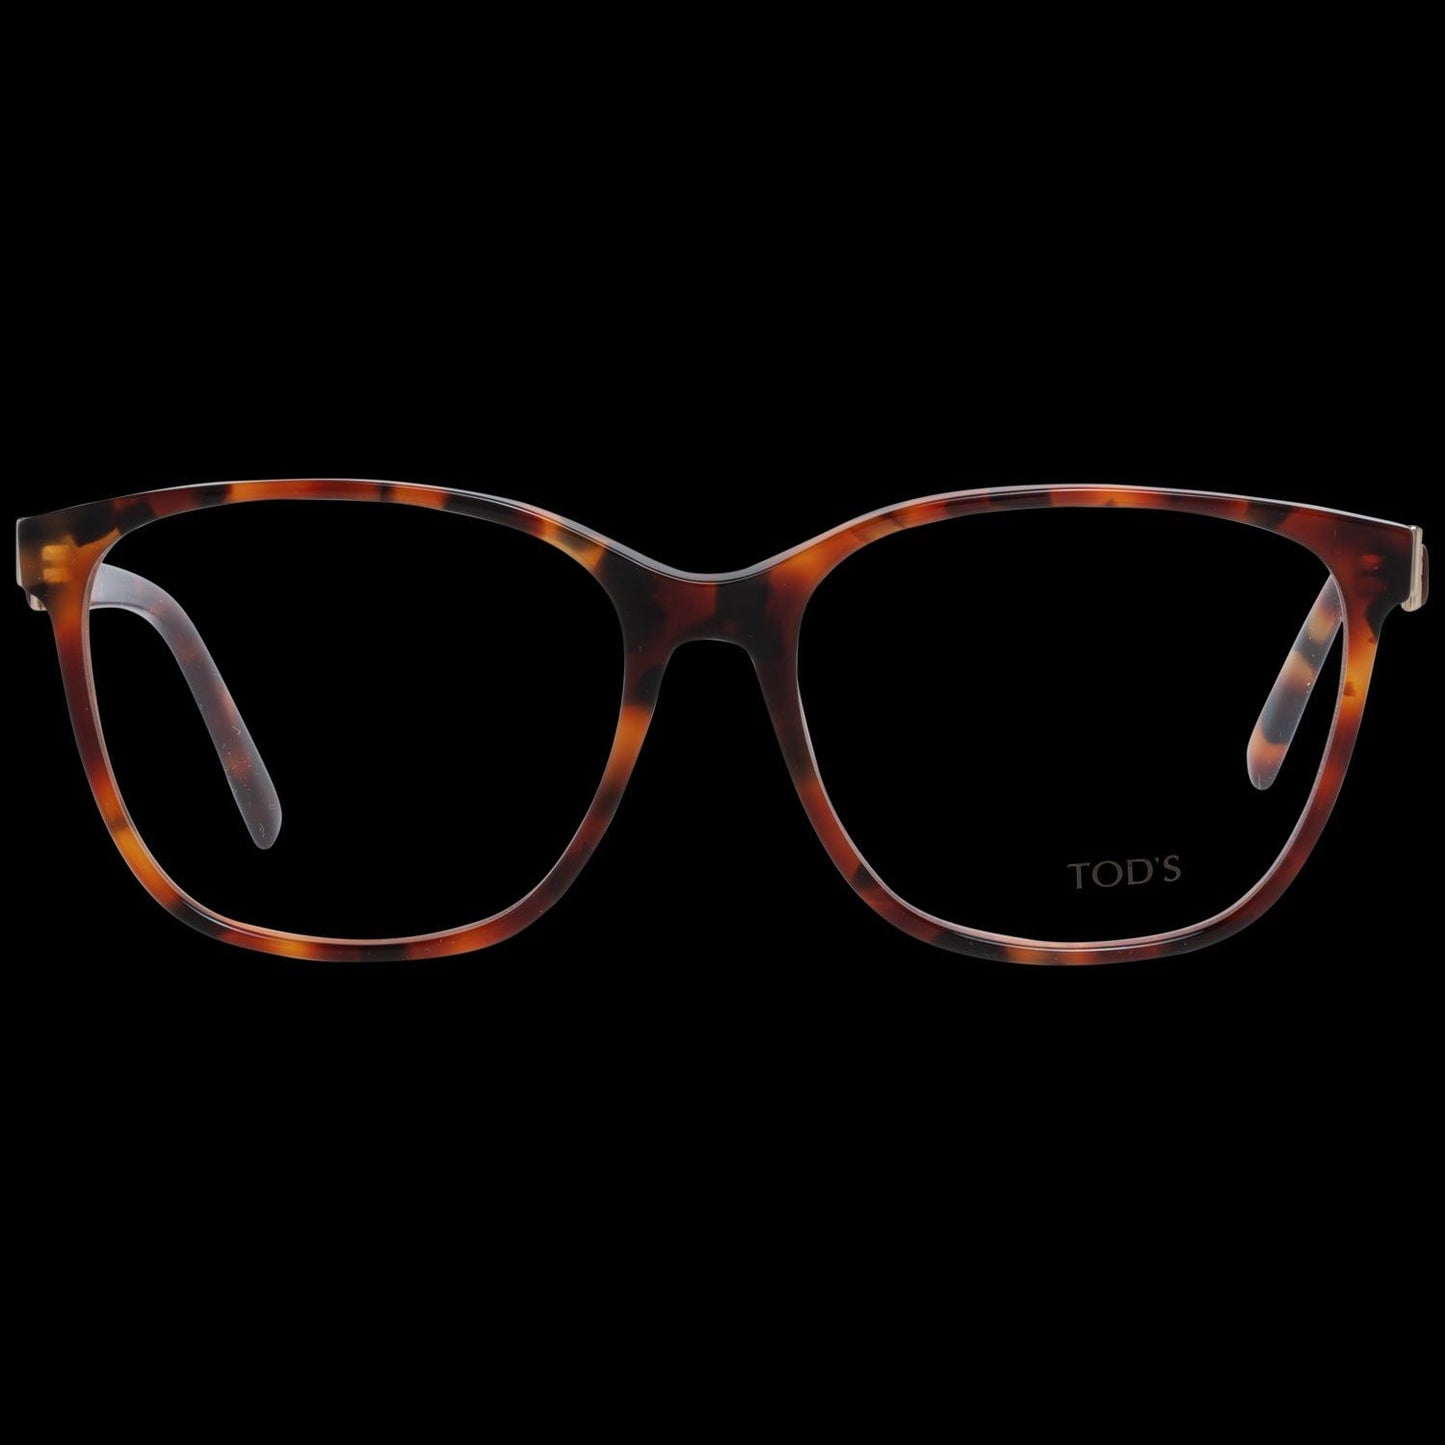 TODS FRAME TODS MOD. TO5227 56055 SUNGLASSES & EYEWEAR tods-mod-to5227-56055